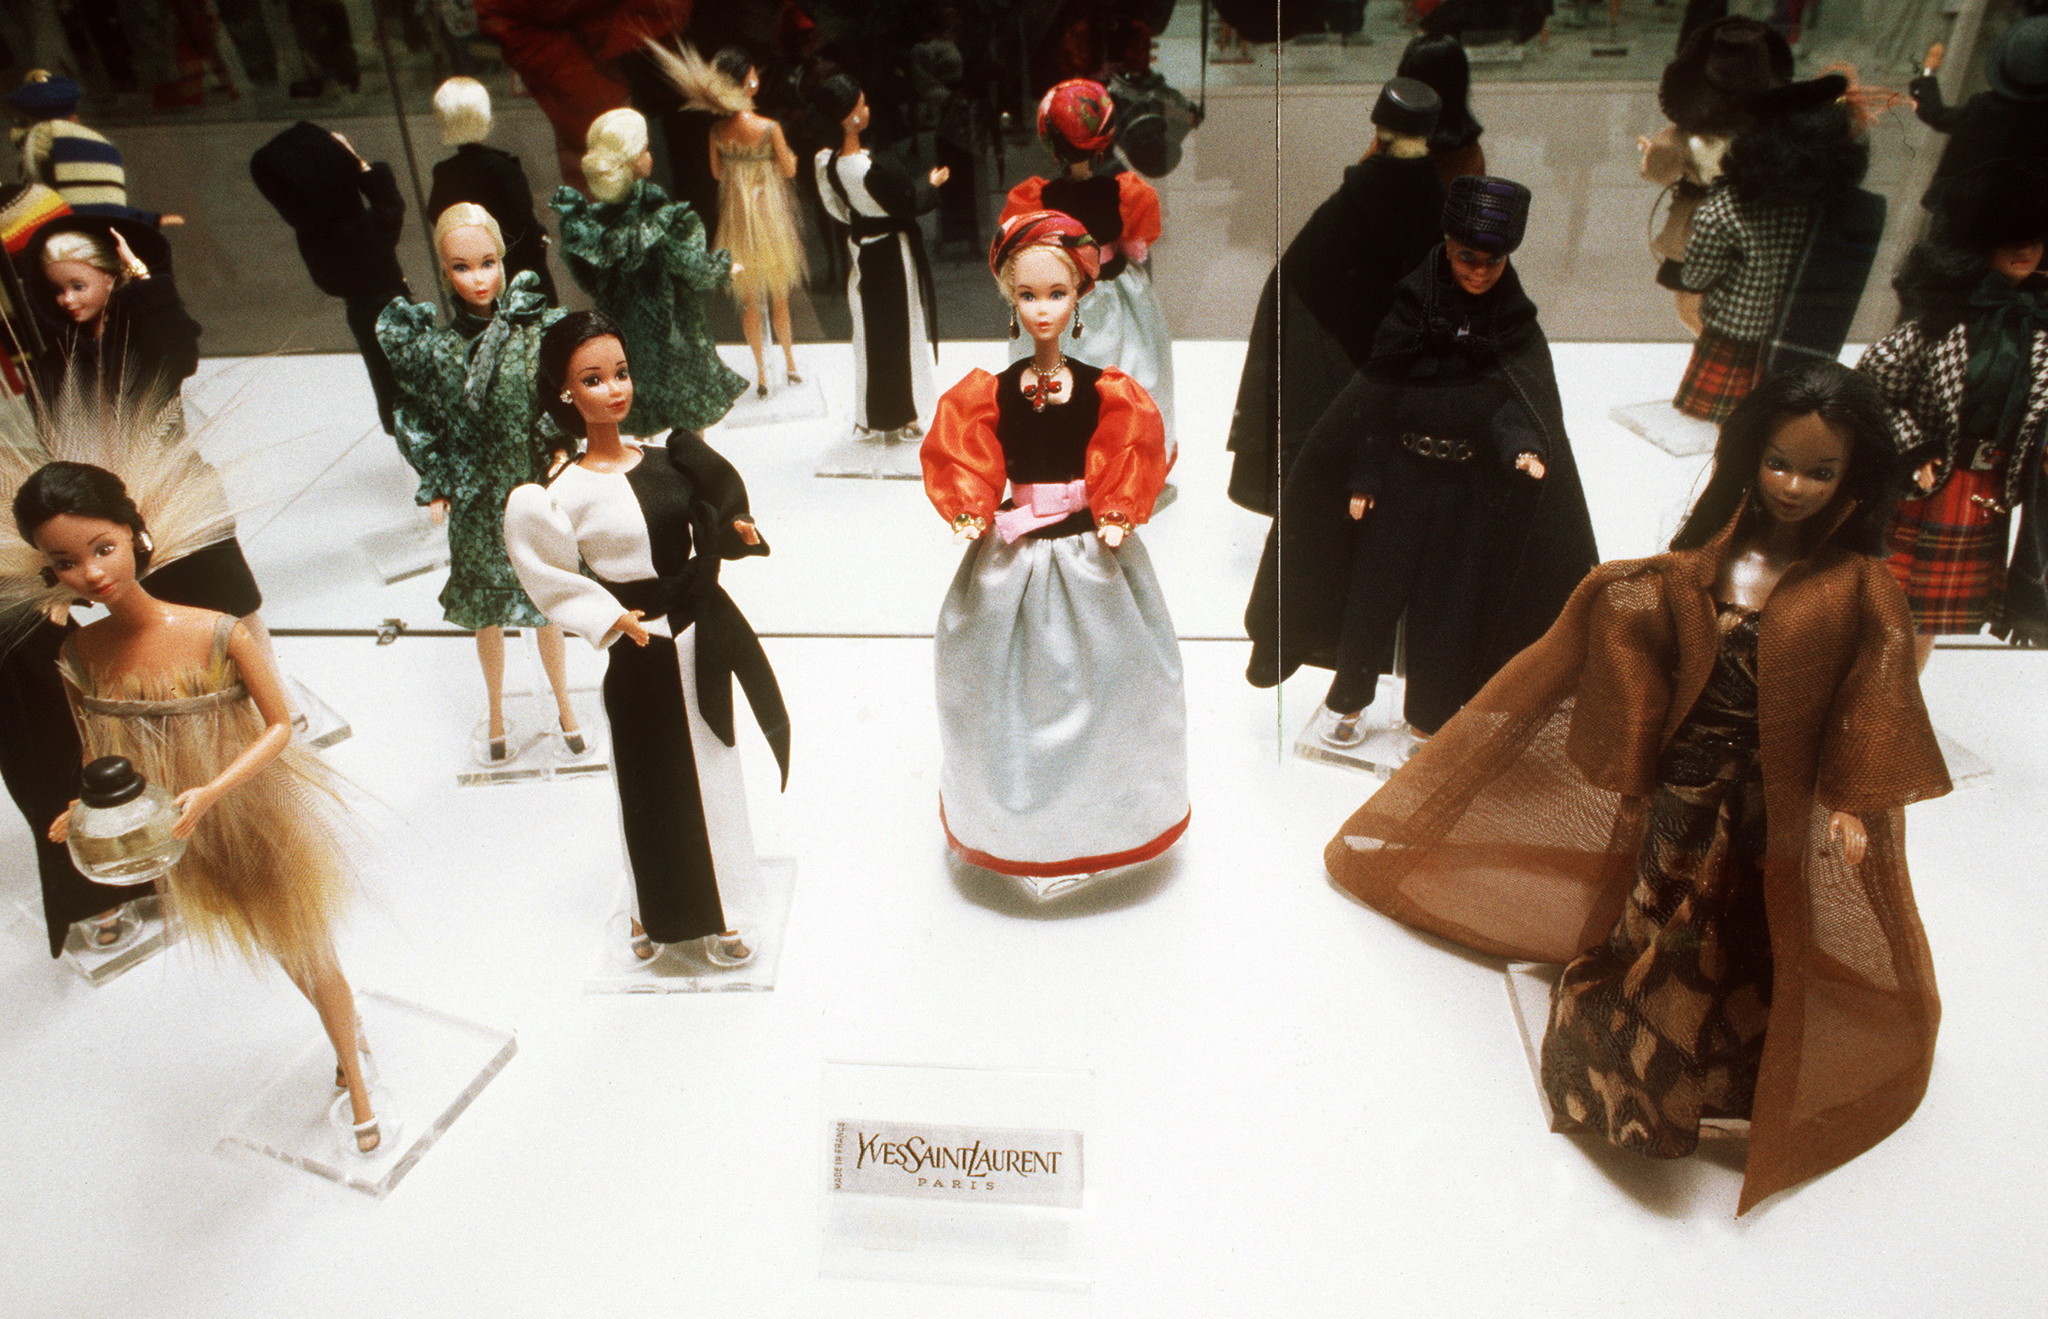 After being introduced wearing a chic black and white swimsuit, it's no wonder Barbie became a fashion icon and muse to many designers. Here, multiple dolls wear miniature outfits designed by Yves Saint Laurent in Paris on Jan. 1, 1989.